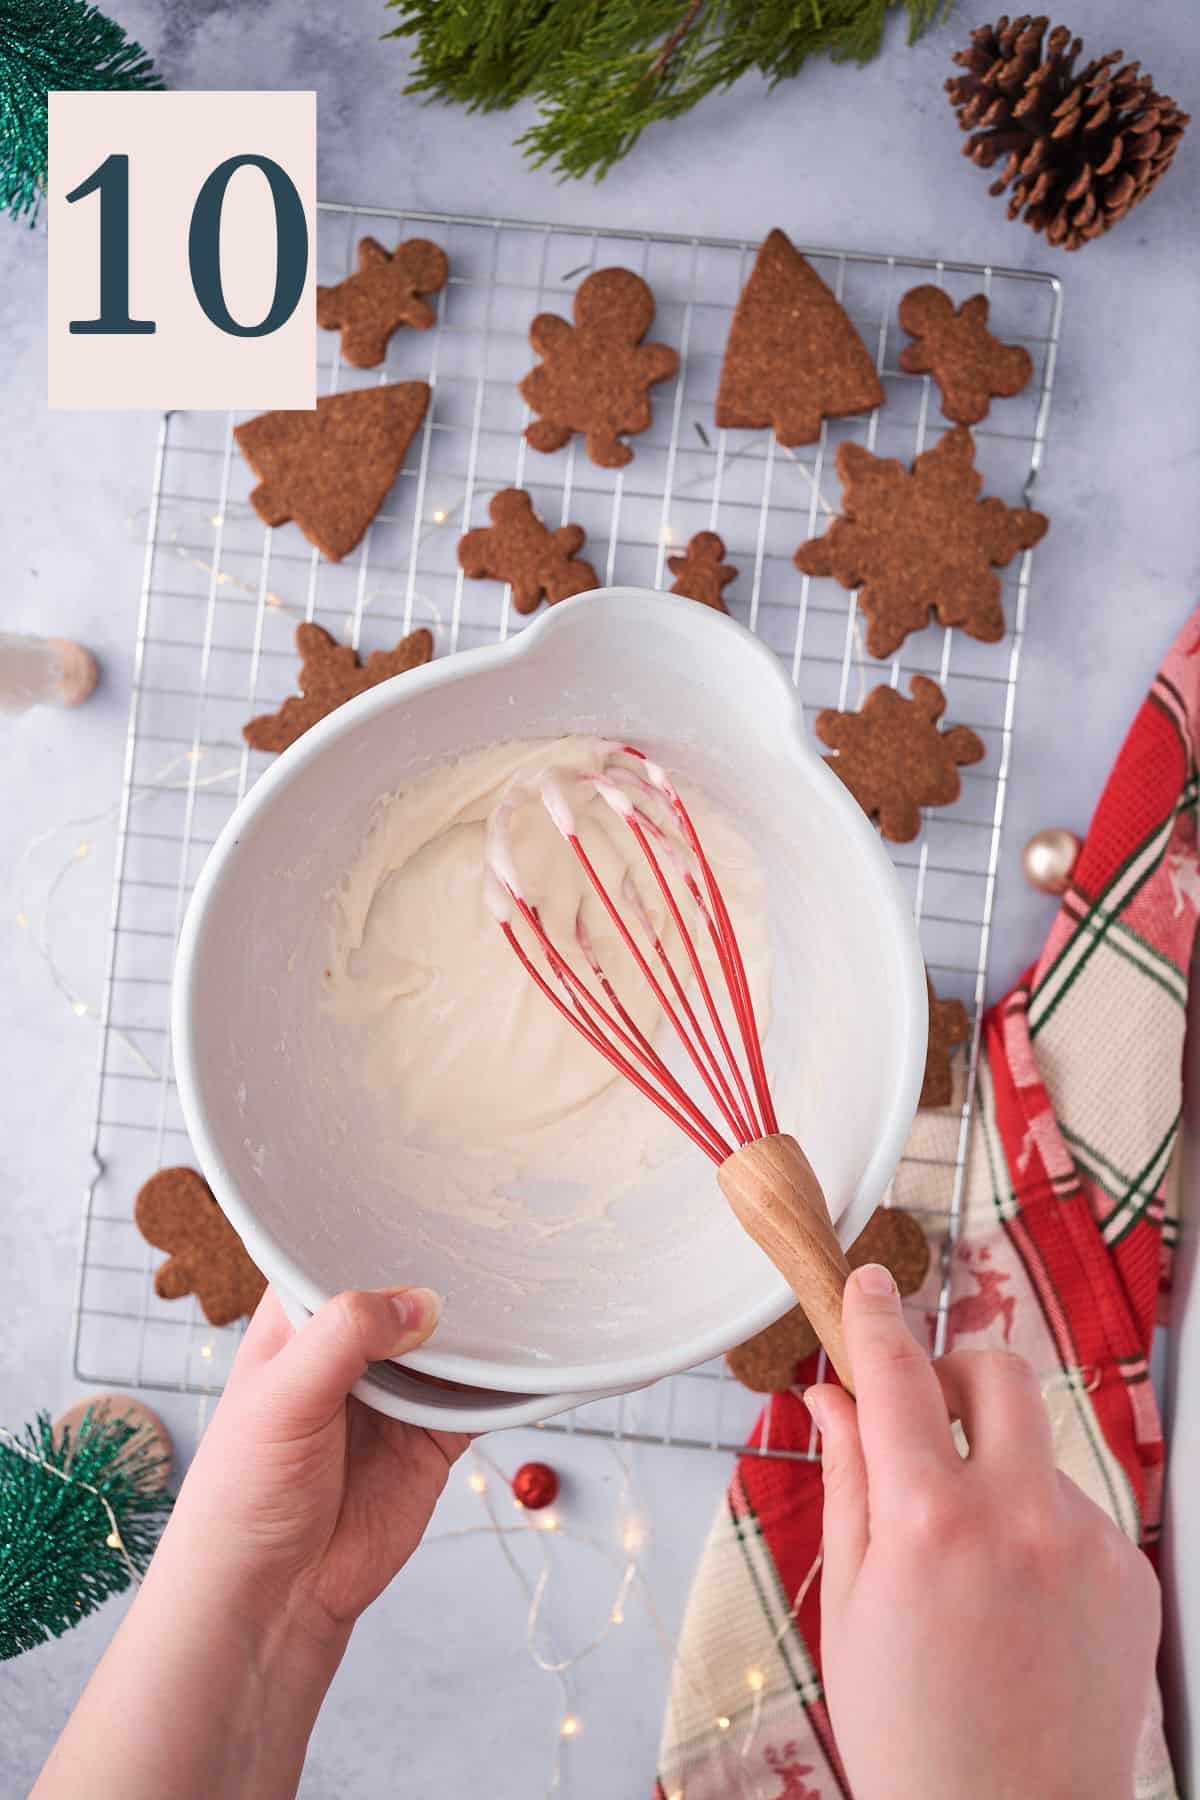 hand mixing together icing in a small bowl over cooling gingerbread cookies.